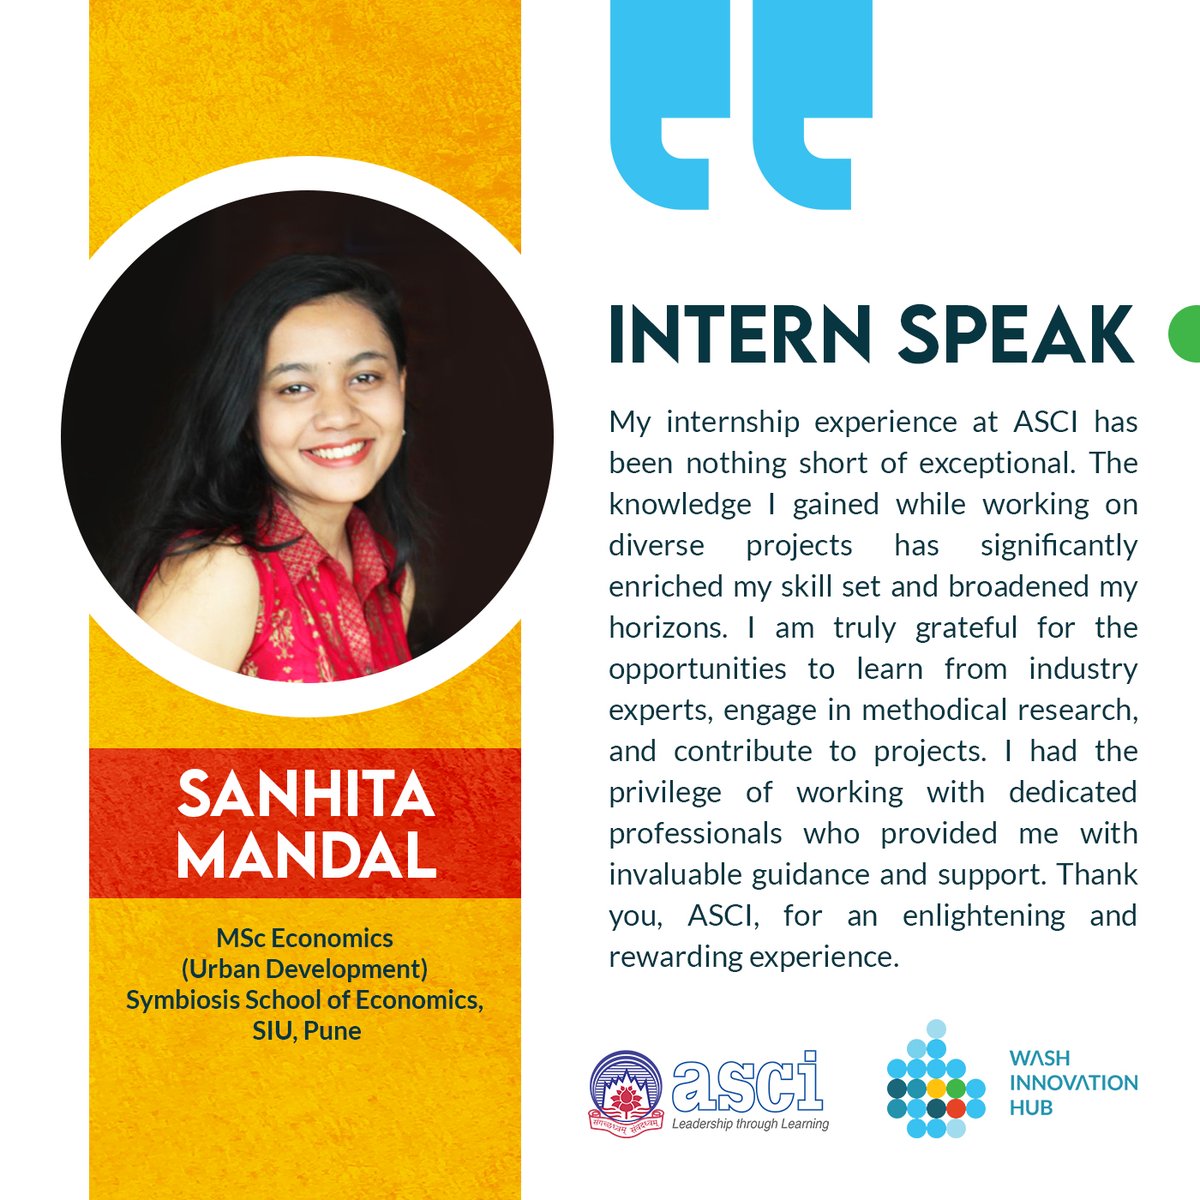 #internspeak 🎉Congratulations, @sanhita2501, on completing your internship! We're thrilled that you had a rewarding learning experience🌟We appreciate the hard work and dedication you displayed during the course of your internship. 👏 Best wishes for your future endeavors!🌟